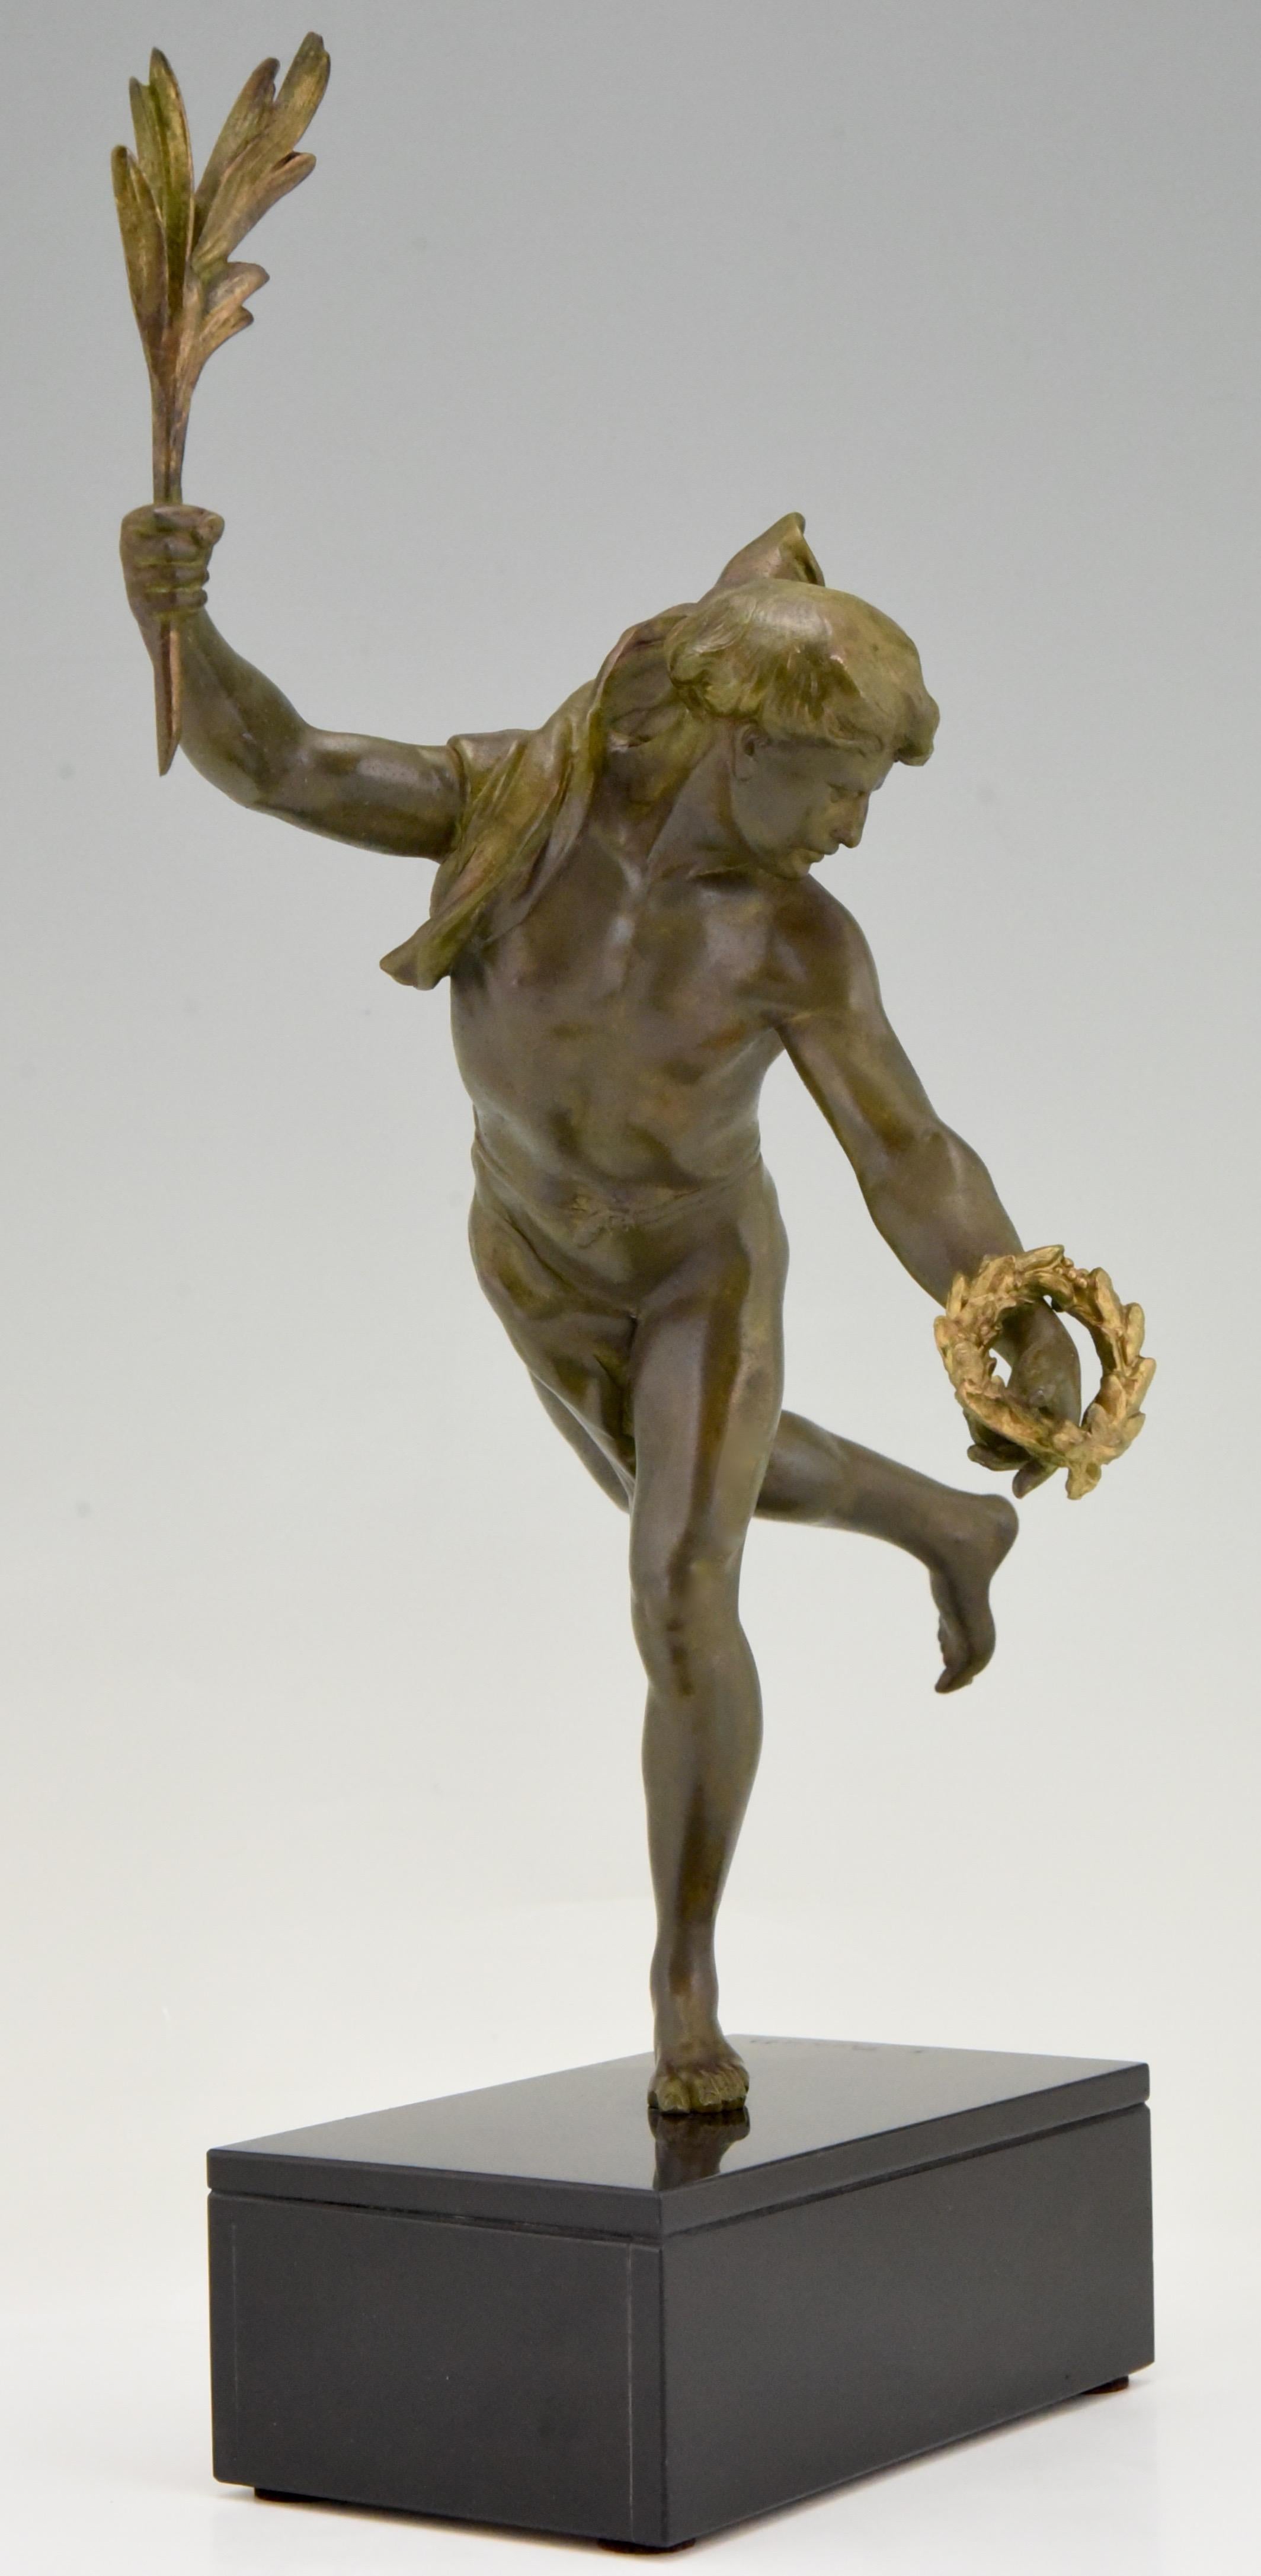 Neoclassical Antique Sculpture of a Man with Laurel Branch by E. Picault ca. 1900